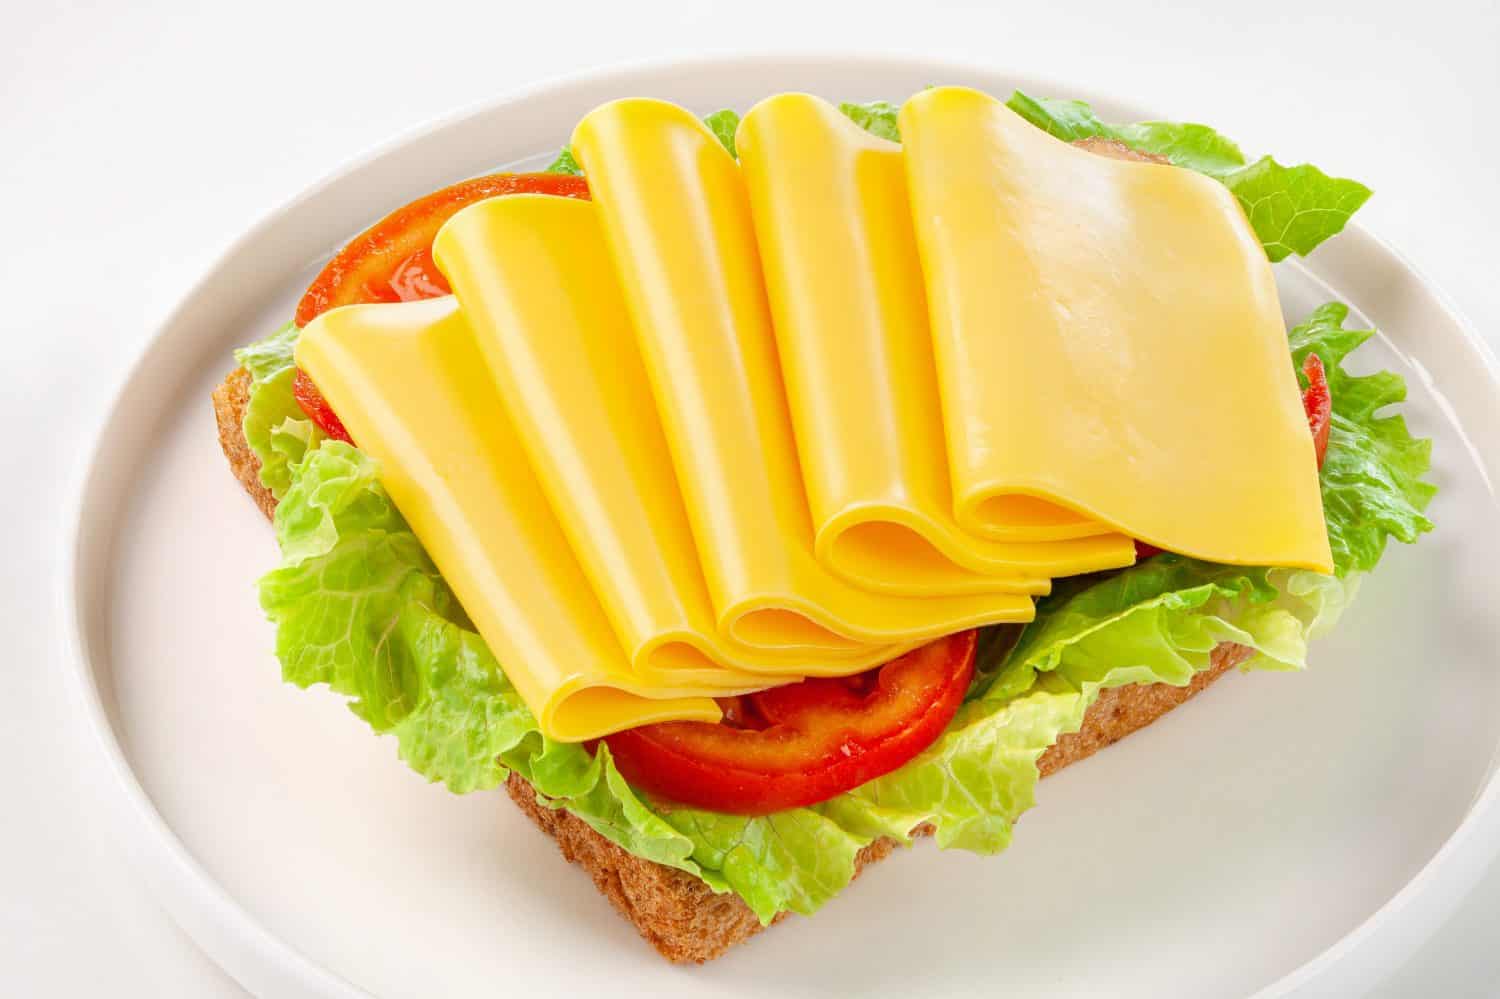 cheese slices and tomato sandwich on a white plate.